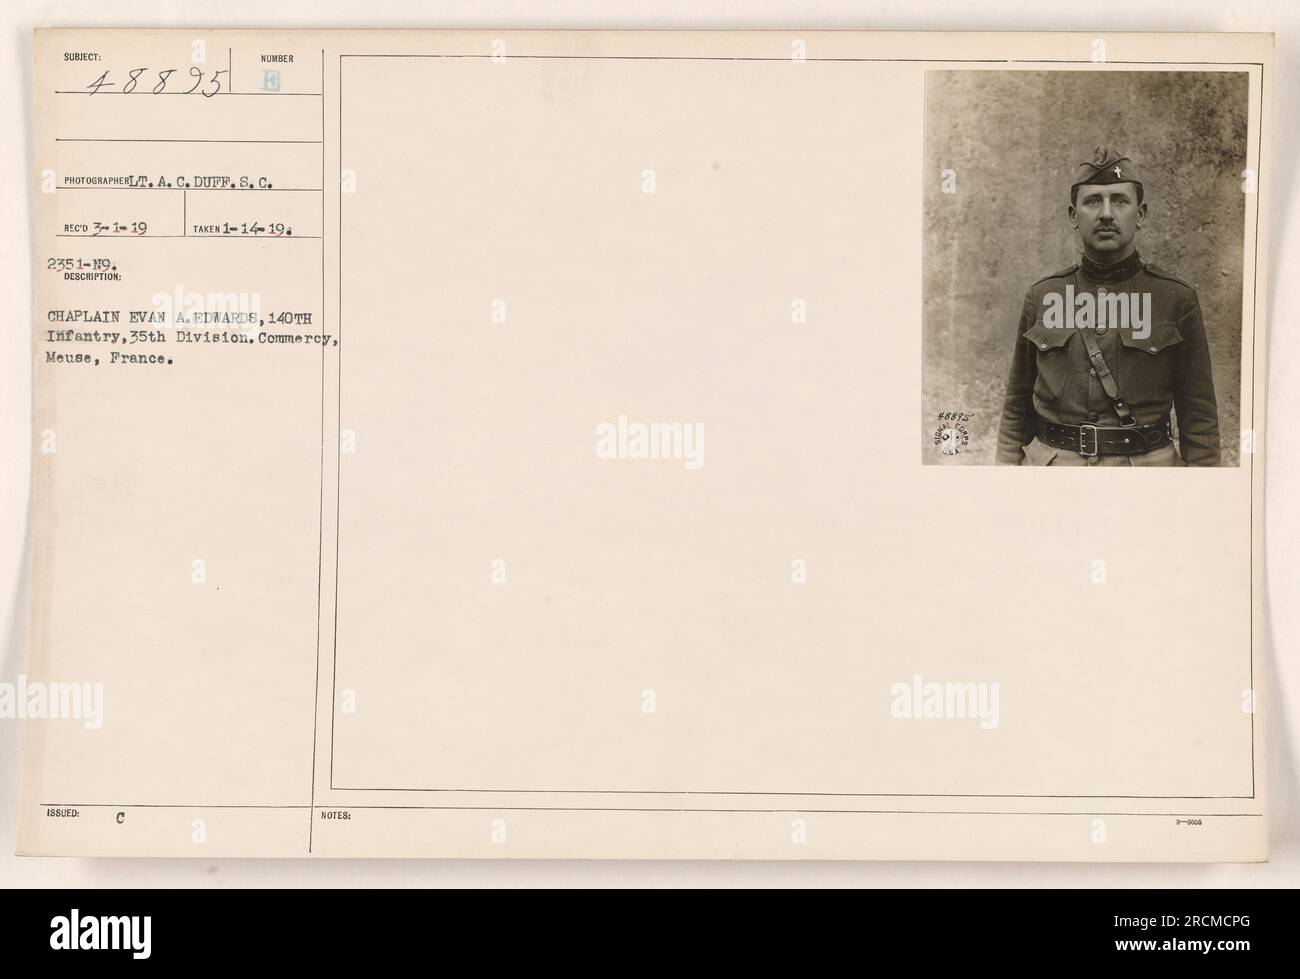 Chaplain Evan A. Edwards of the 140th Infantry is seen in Commercy, Meuse, France. The photograph was taken on January 14, 1919, and was issued by A.C. Duff. It is numbered 48895, with additional notes indicating that it is part of reco 3-1-19 and S 04. Stock Photo